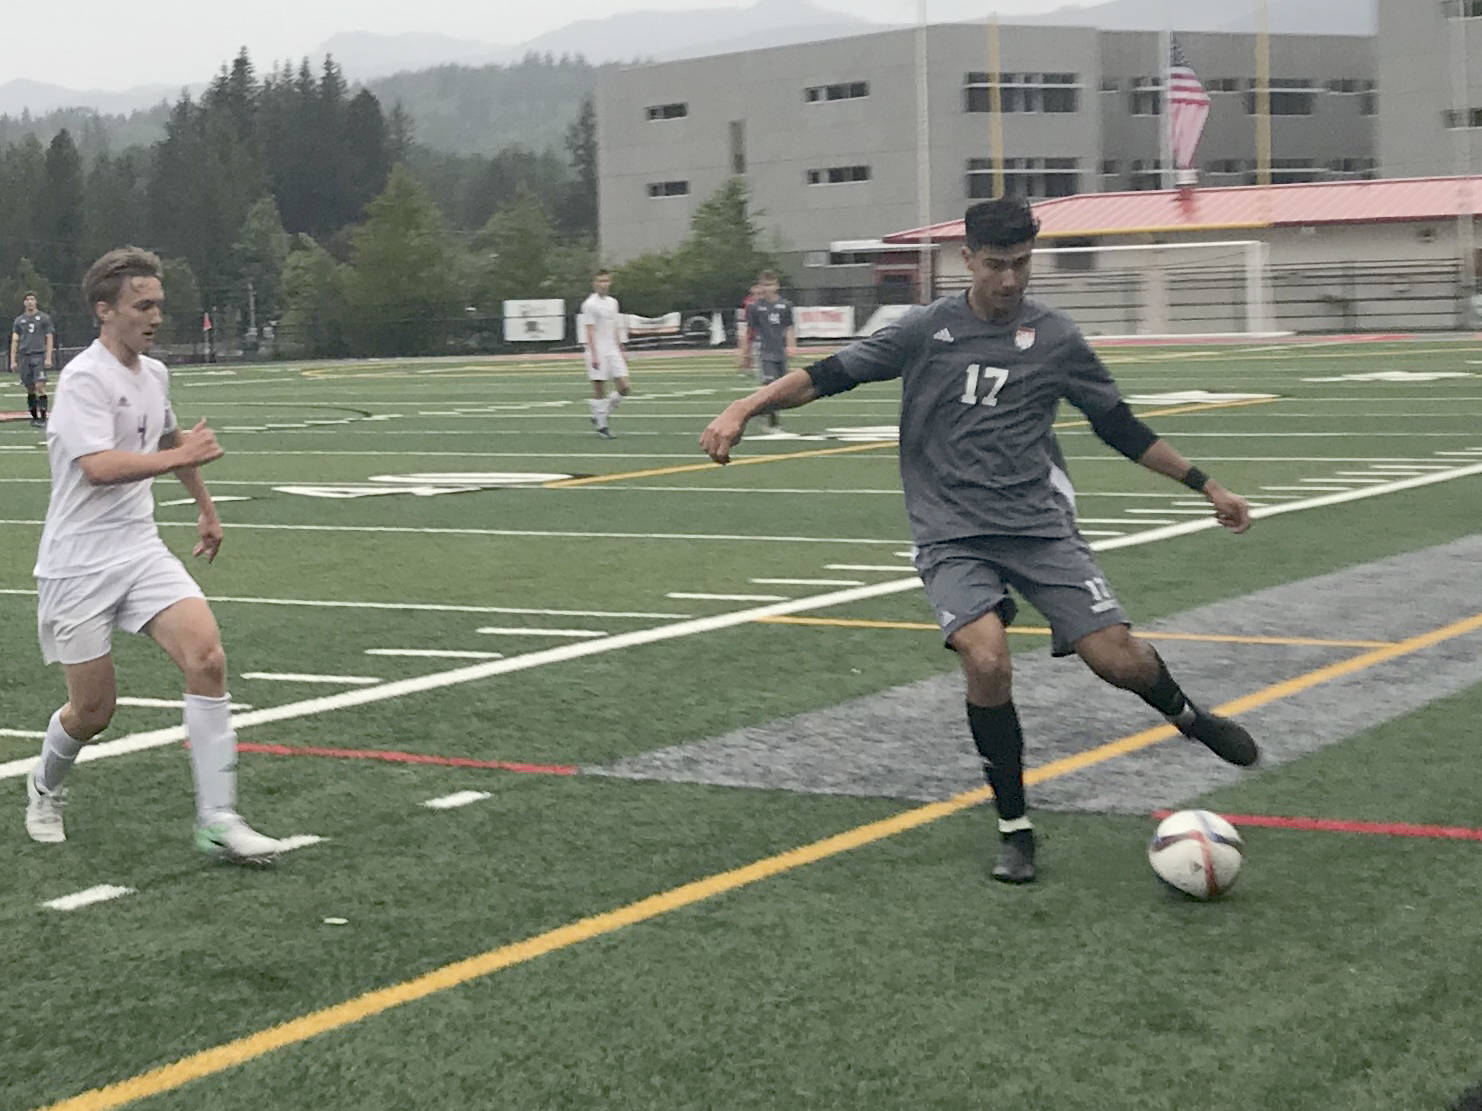 Mount Si junior defender Jake Jimenez, right, passes the ball up field to a teammate in the first half of play against the Sumner Spartans. Mount Si defeated Sumner 2-1 in the first round of the 4A state playoffs on May 15 at Mount Si High School in Snoqualmie. Shaun Scott/staff photo